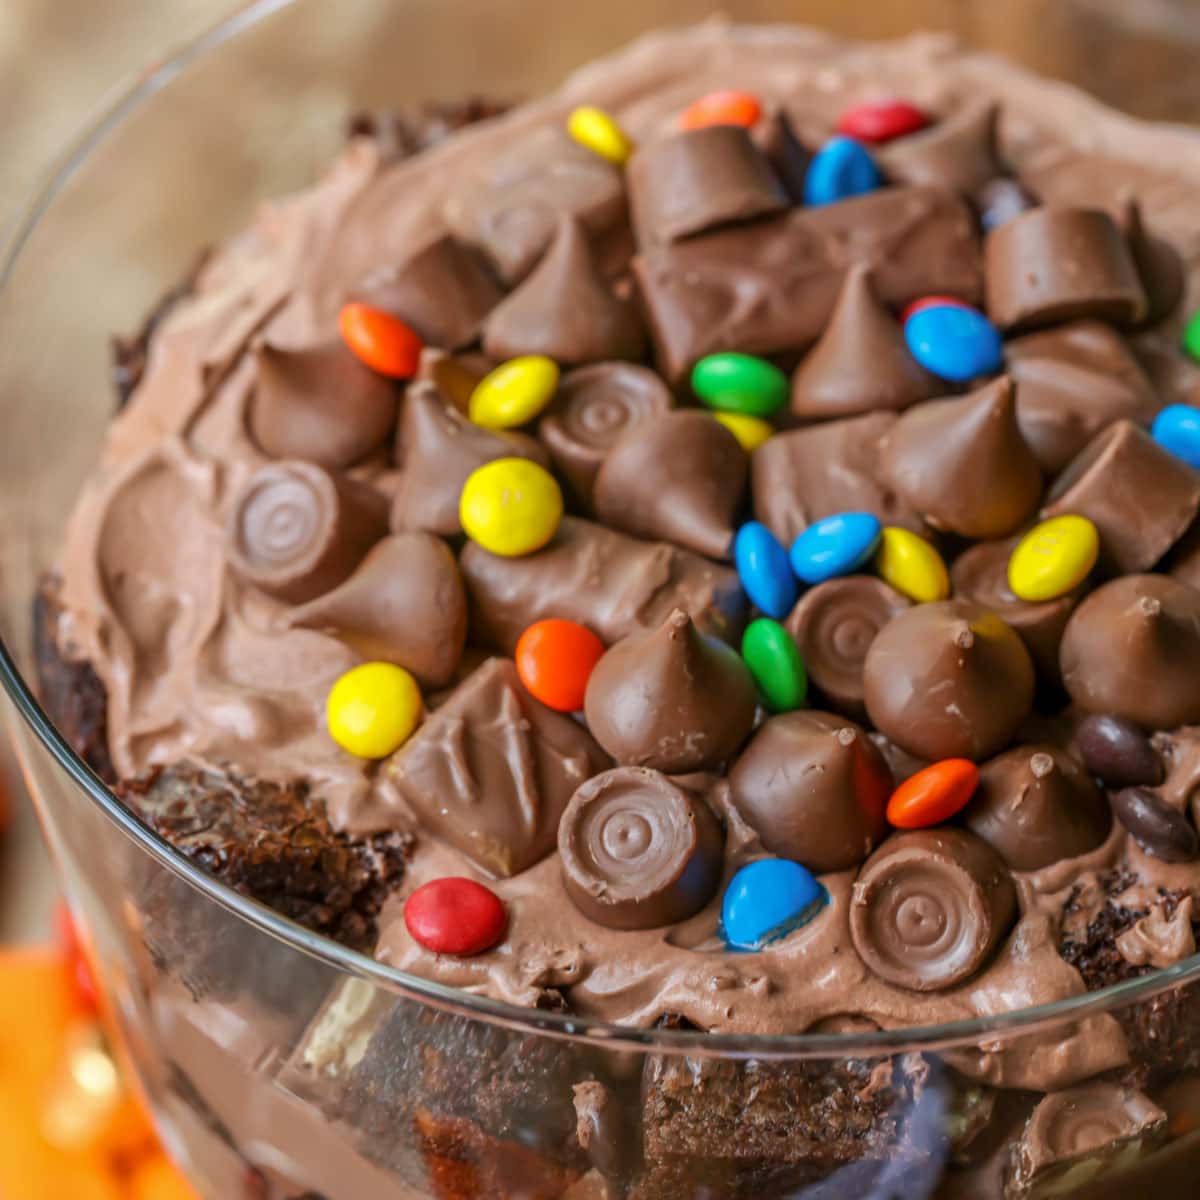 Halloween desserts - candy bar trifle covered with chocolate candy.